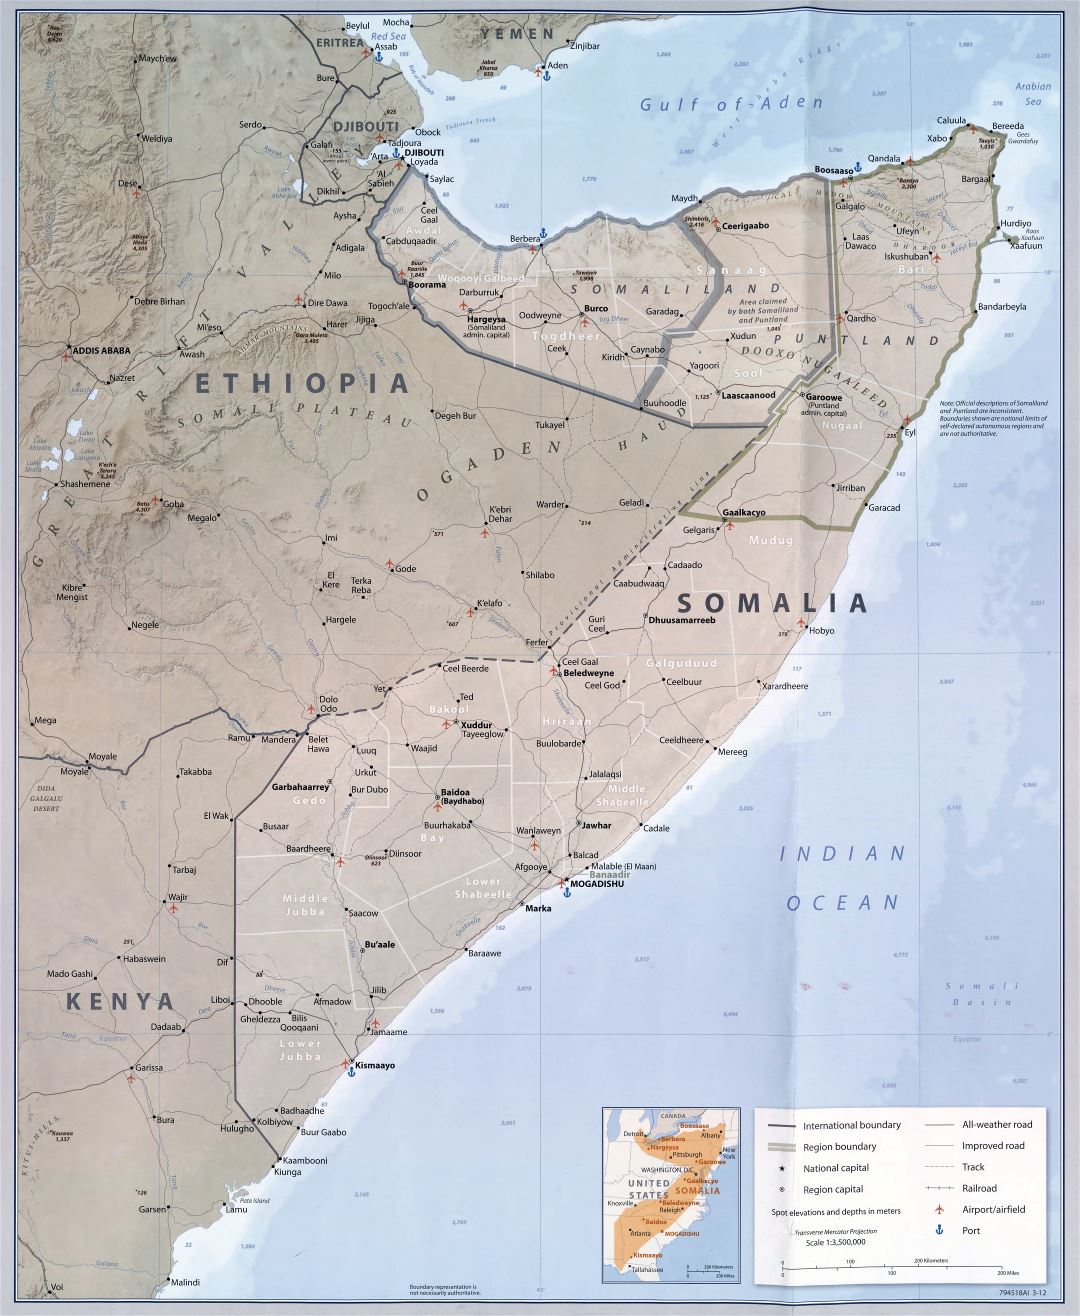 Large scale detailed political and administrative map of Somalia with relief, roads, railroads, cities, ports, airports and other marks - 2012